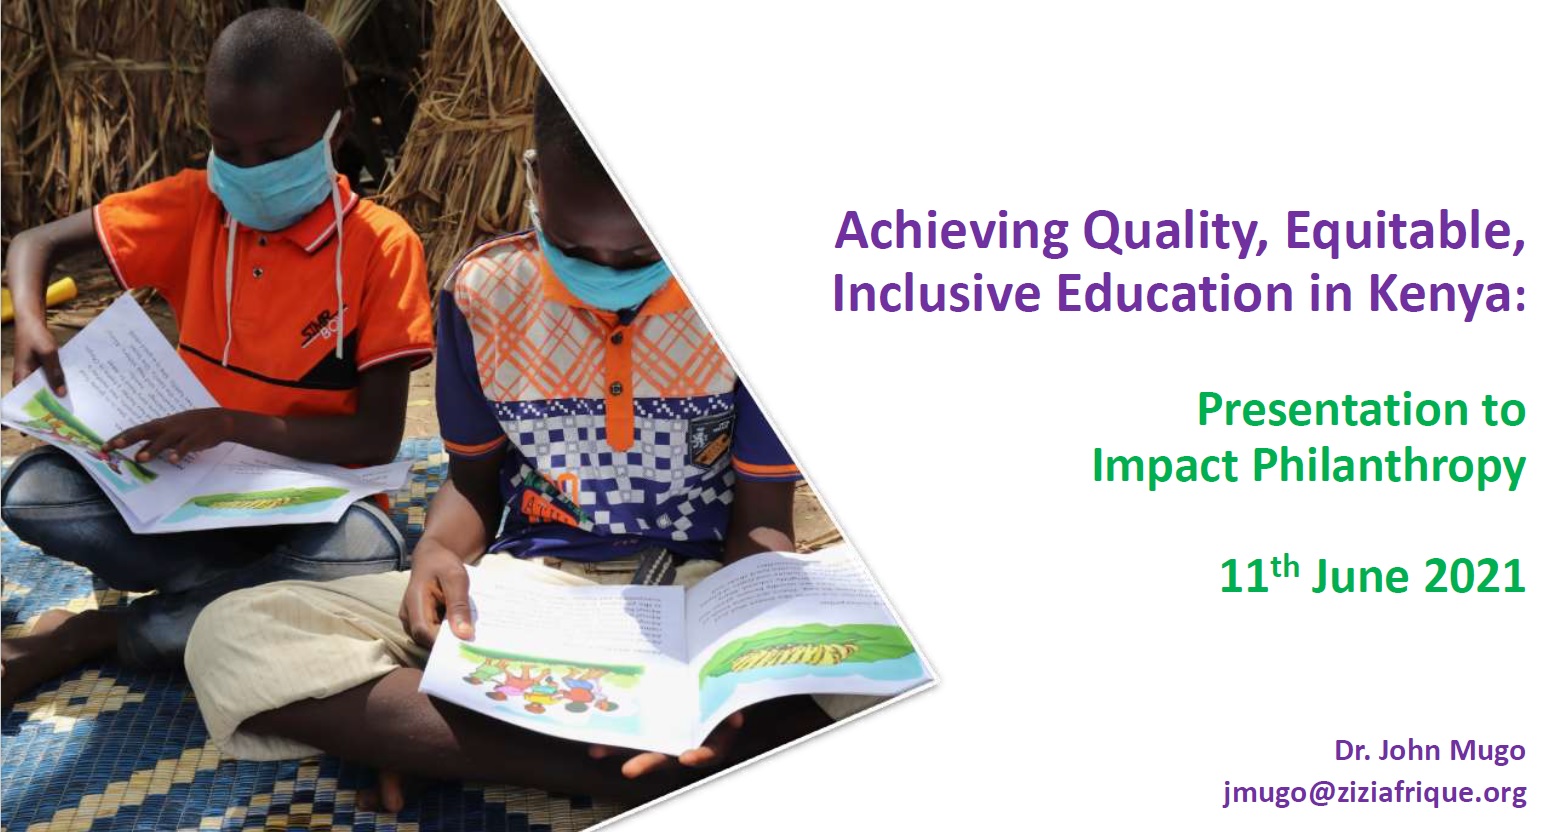 Achieving Quality, Equitable, Inclusive Education in Kenya